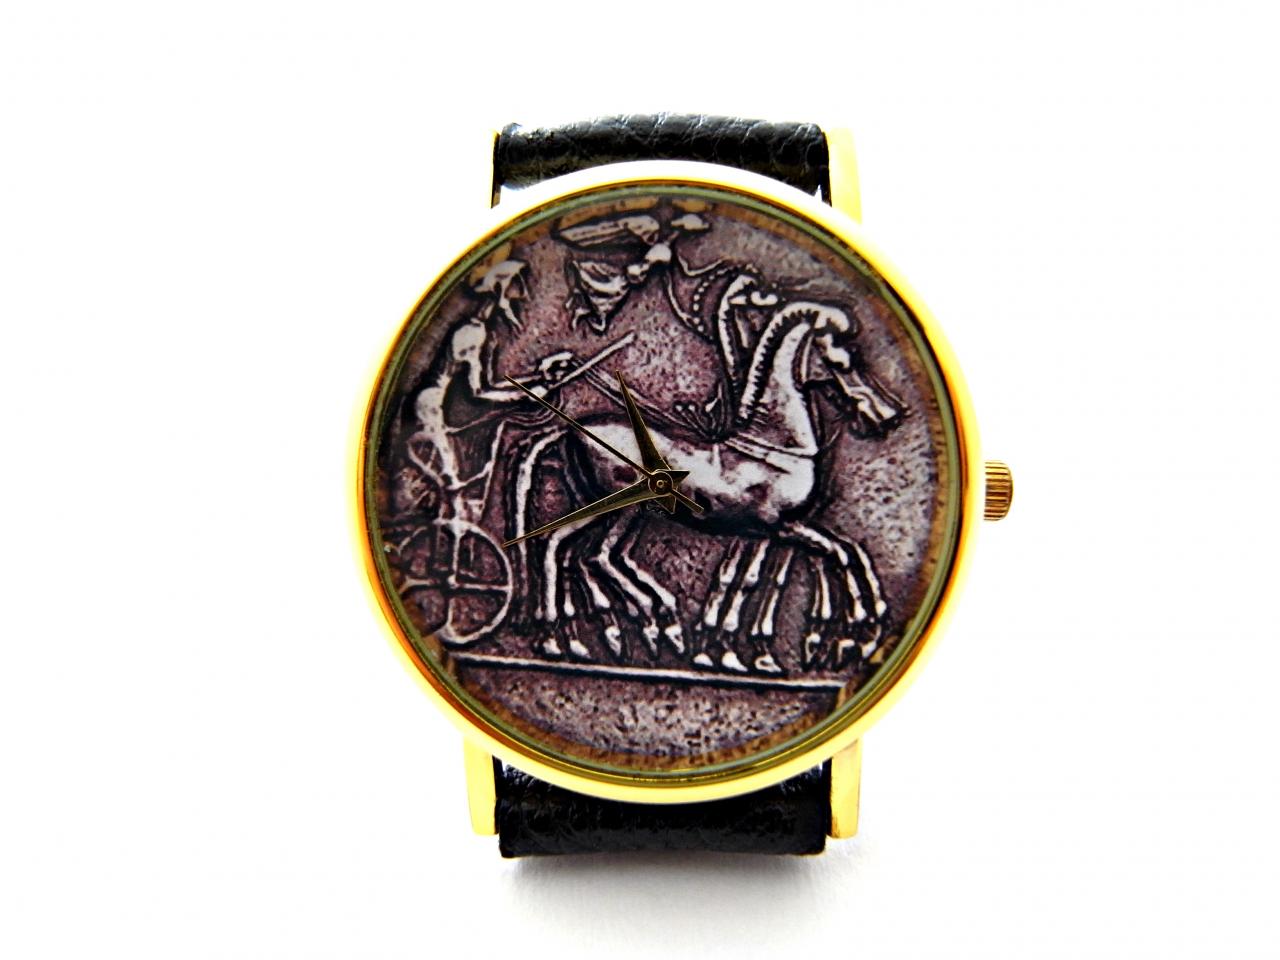 Antique Coin, Old Coin Leather Wrist Watch, Woman Man Lady Unisex Watch, Genuine Leather Handmade Unique Watch #111